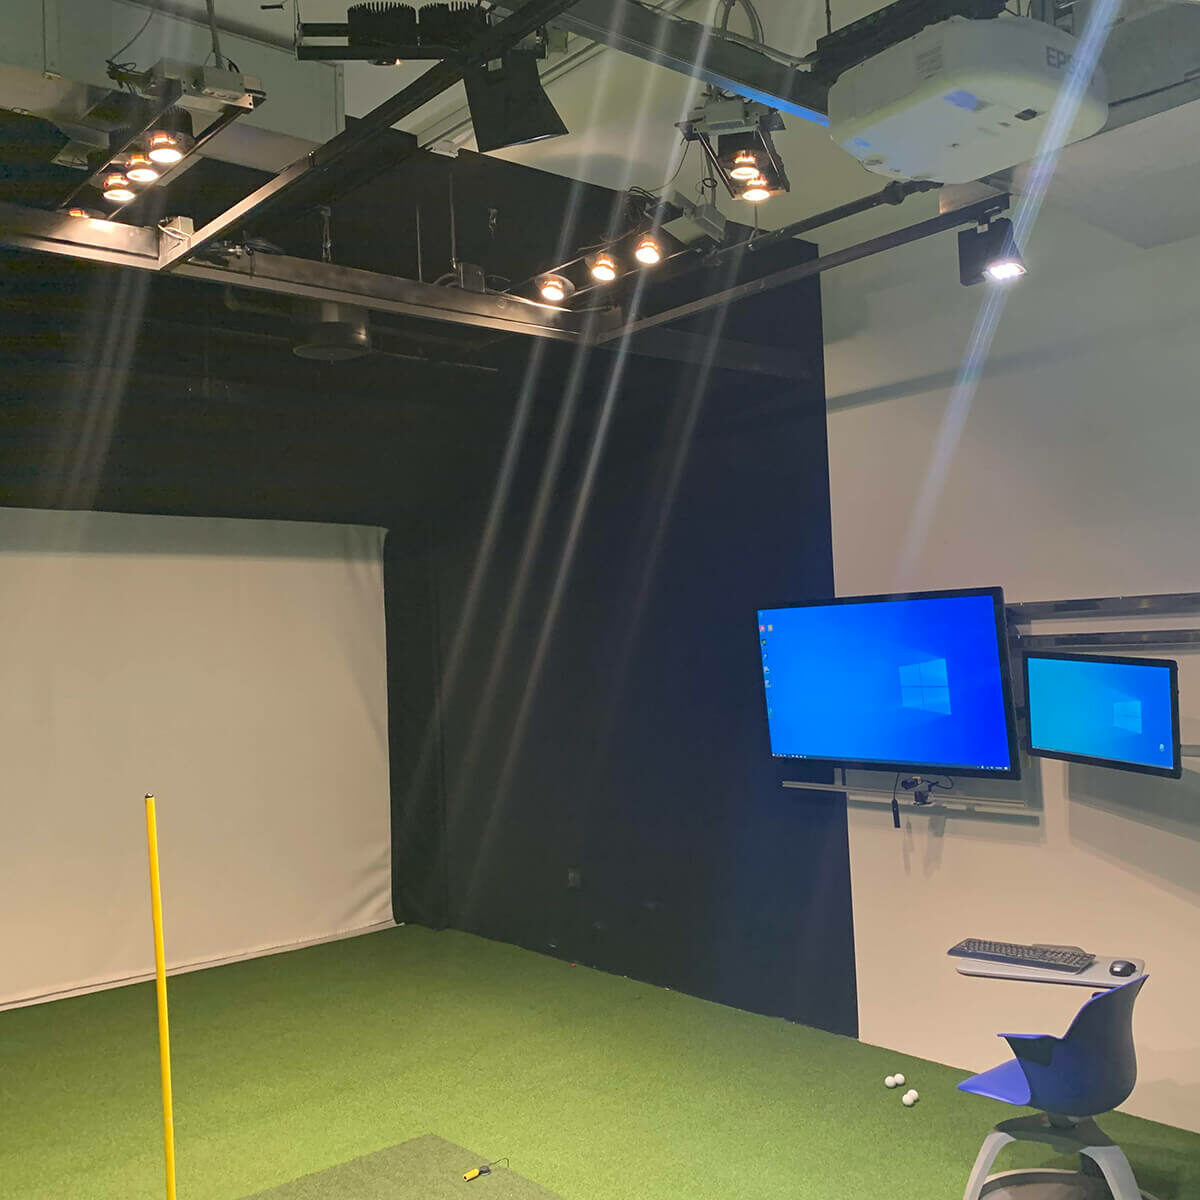 Lights for new video system at Bridge Golf Learning Center